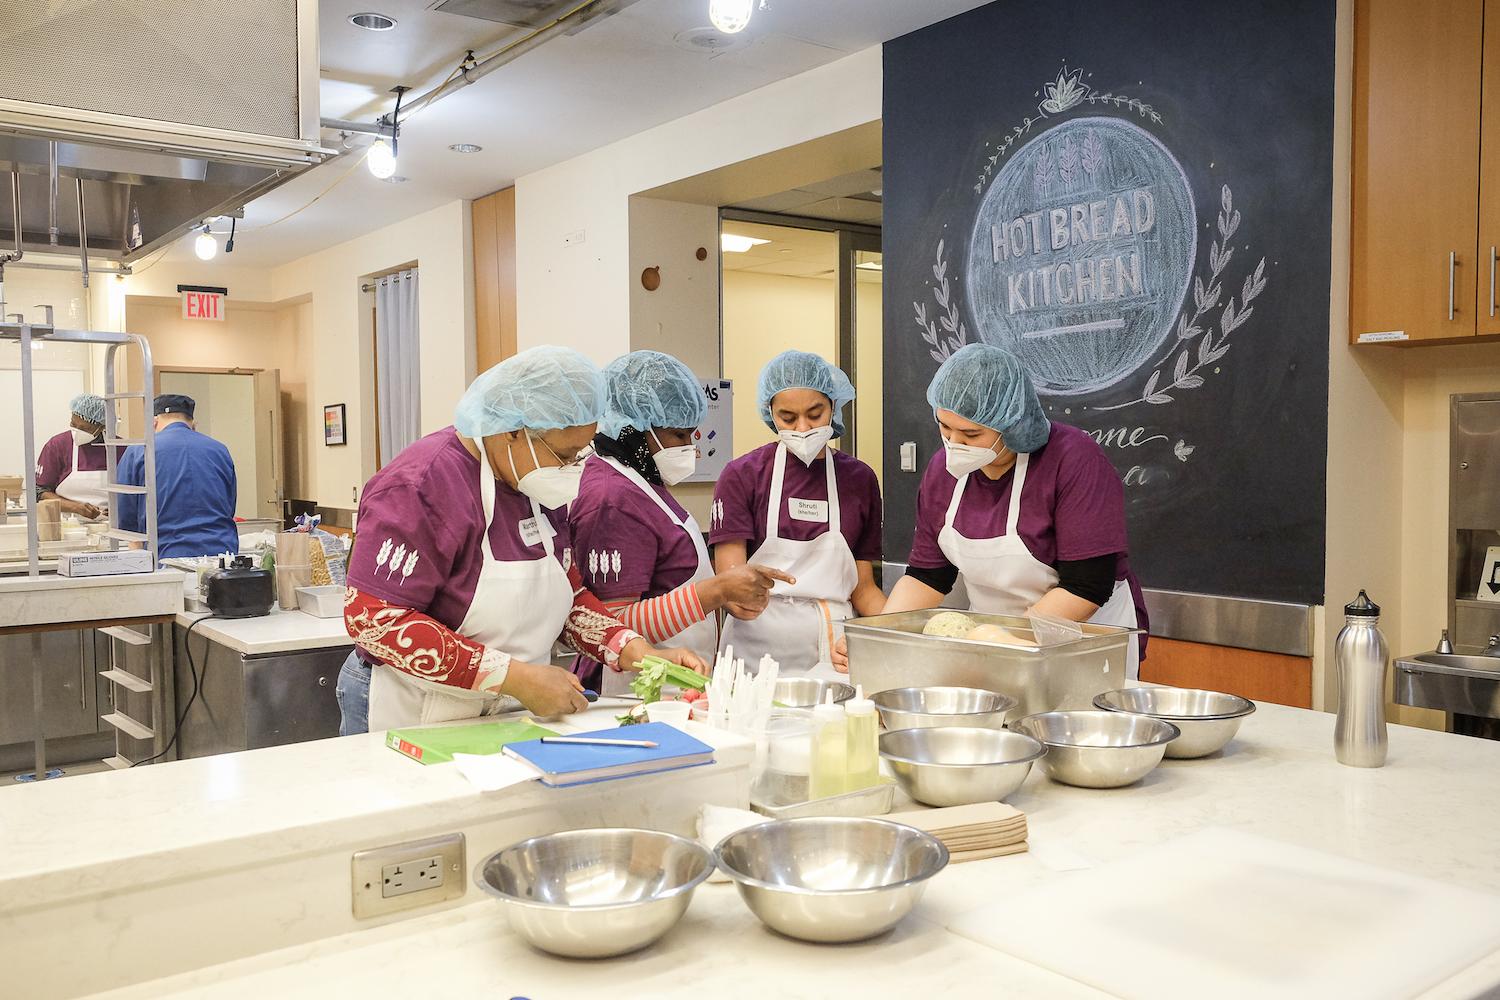 hot bread kitchen - empowering immigrant women with restaurant training